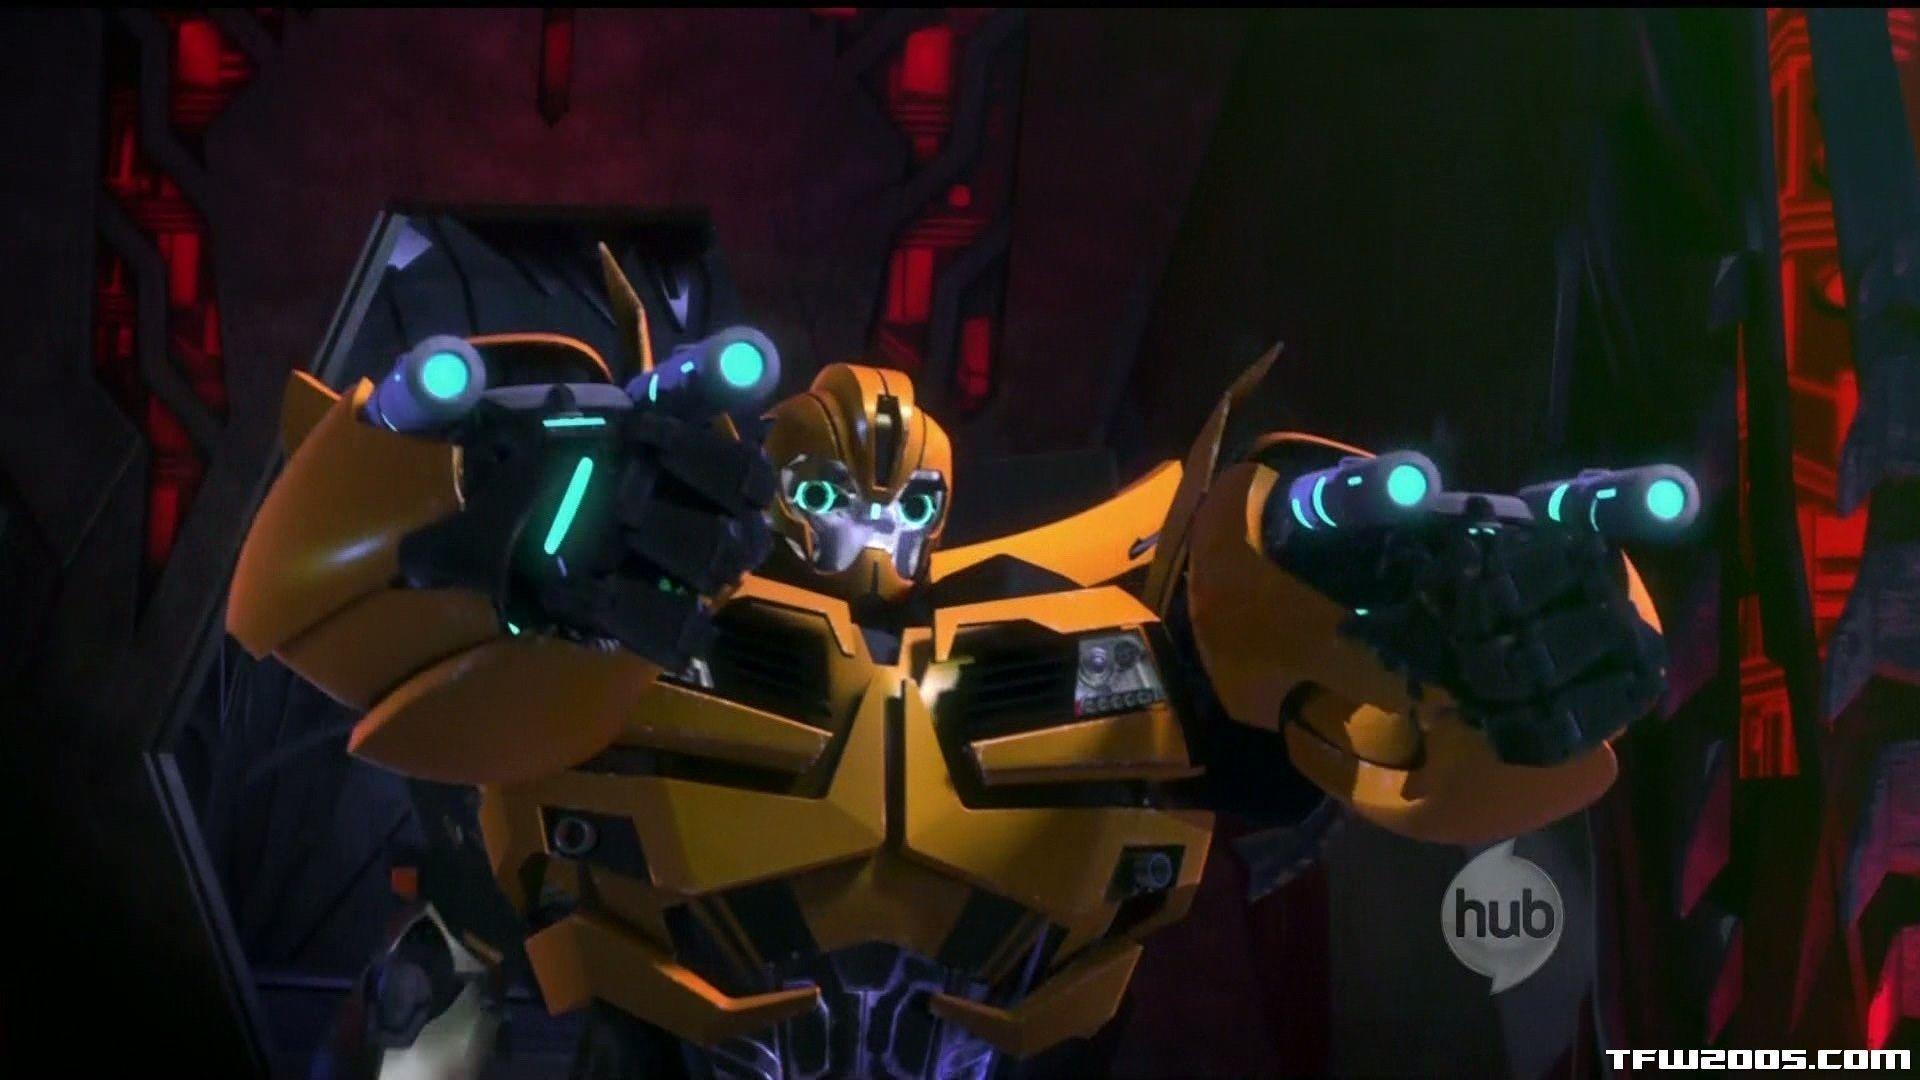 Transformers: Prime the animated series Prime Image